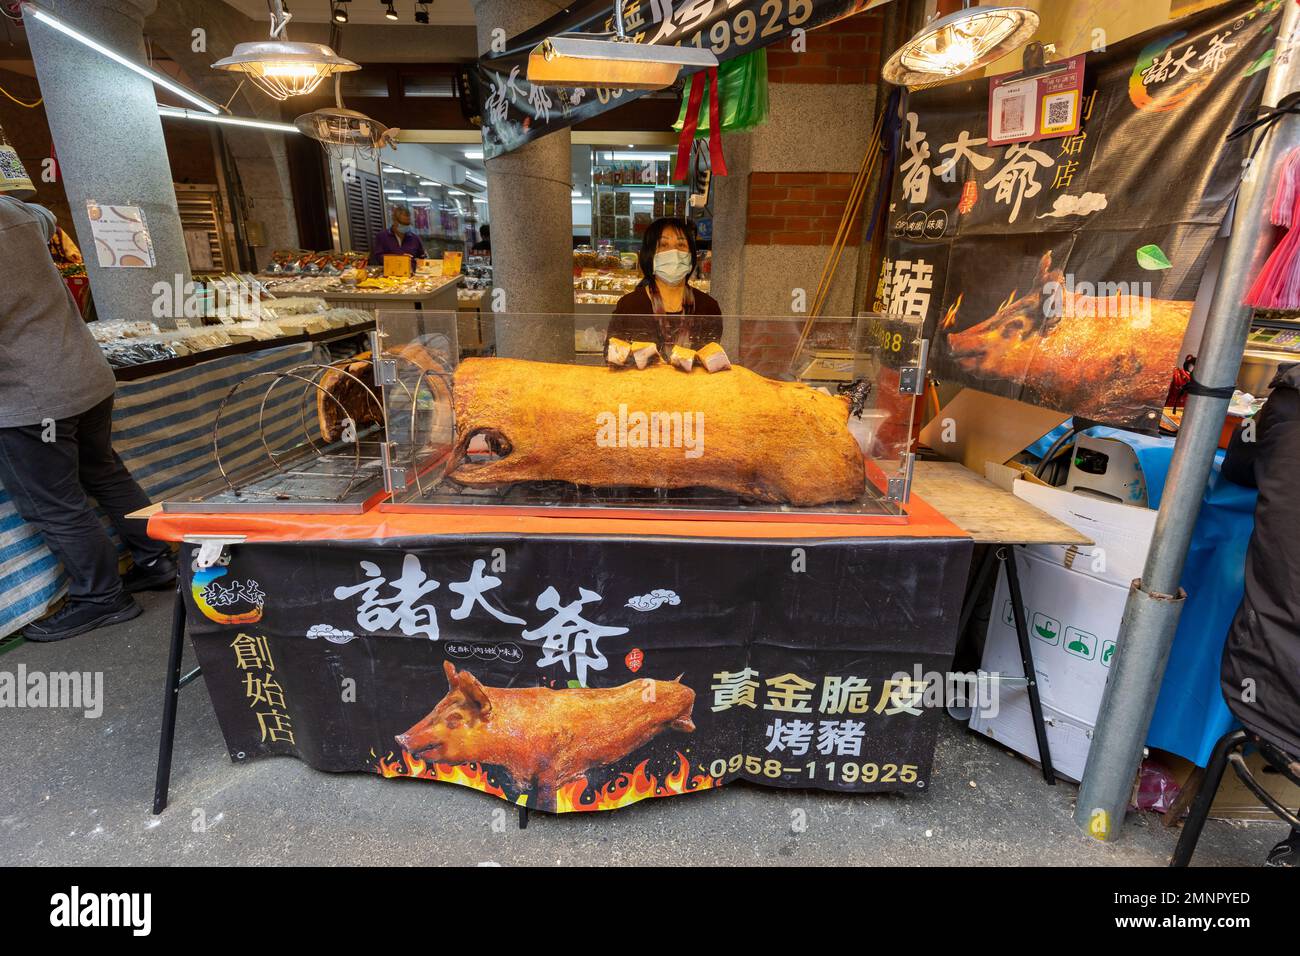 Selling crispy pig skin at the Dihua St New Year's market in Taipei, Taiwan. Stock Photo